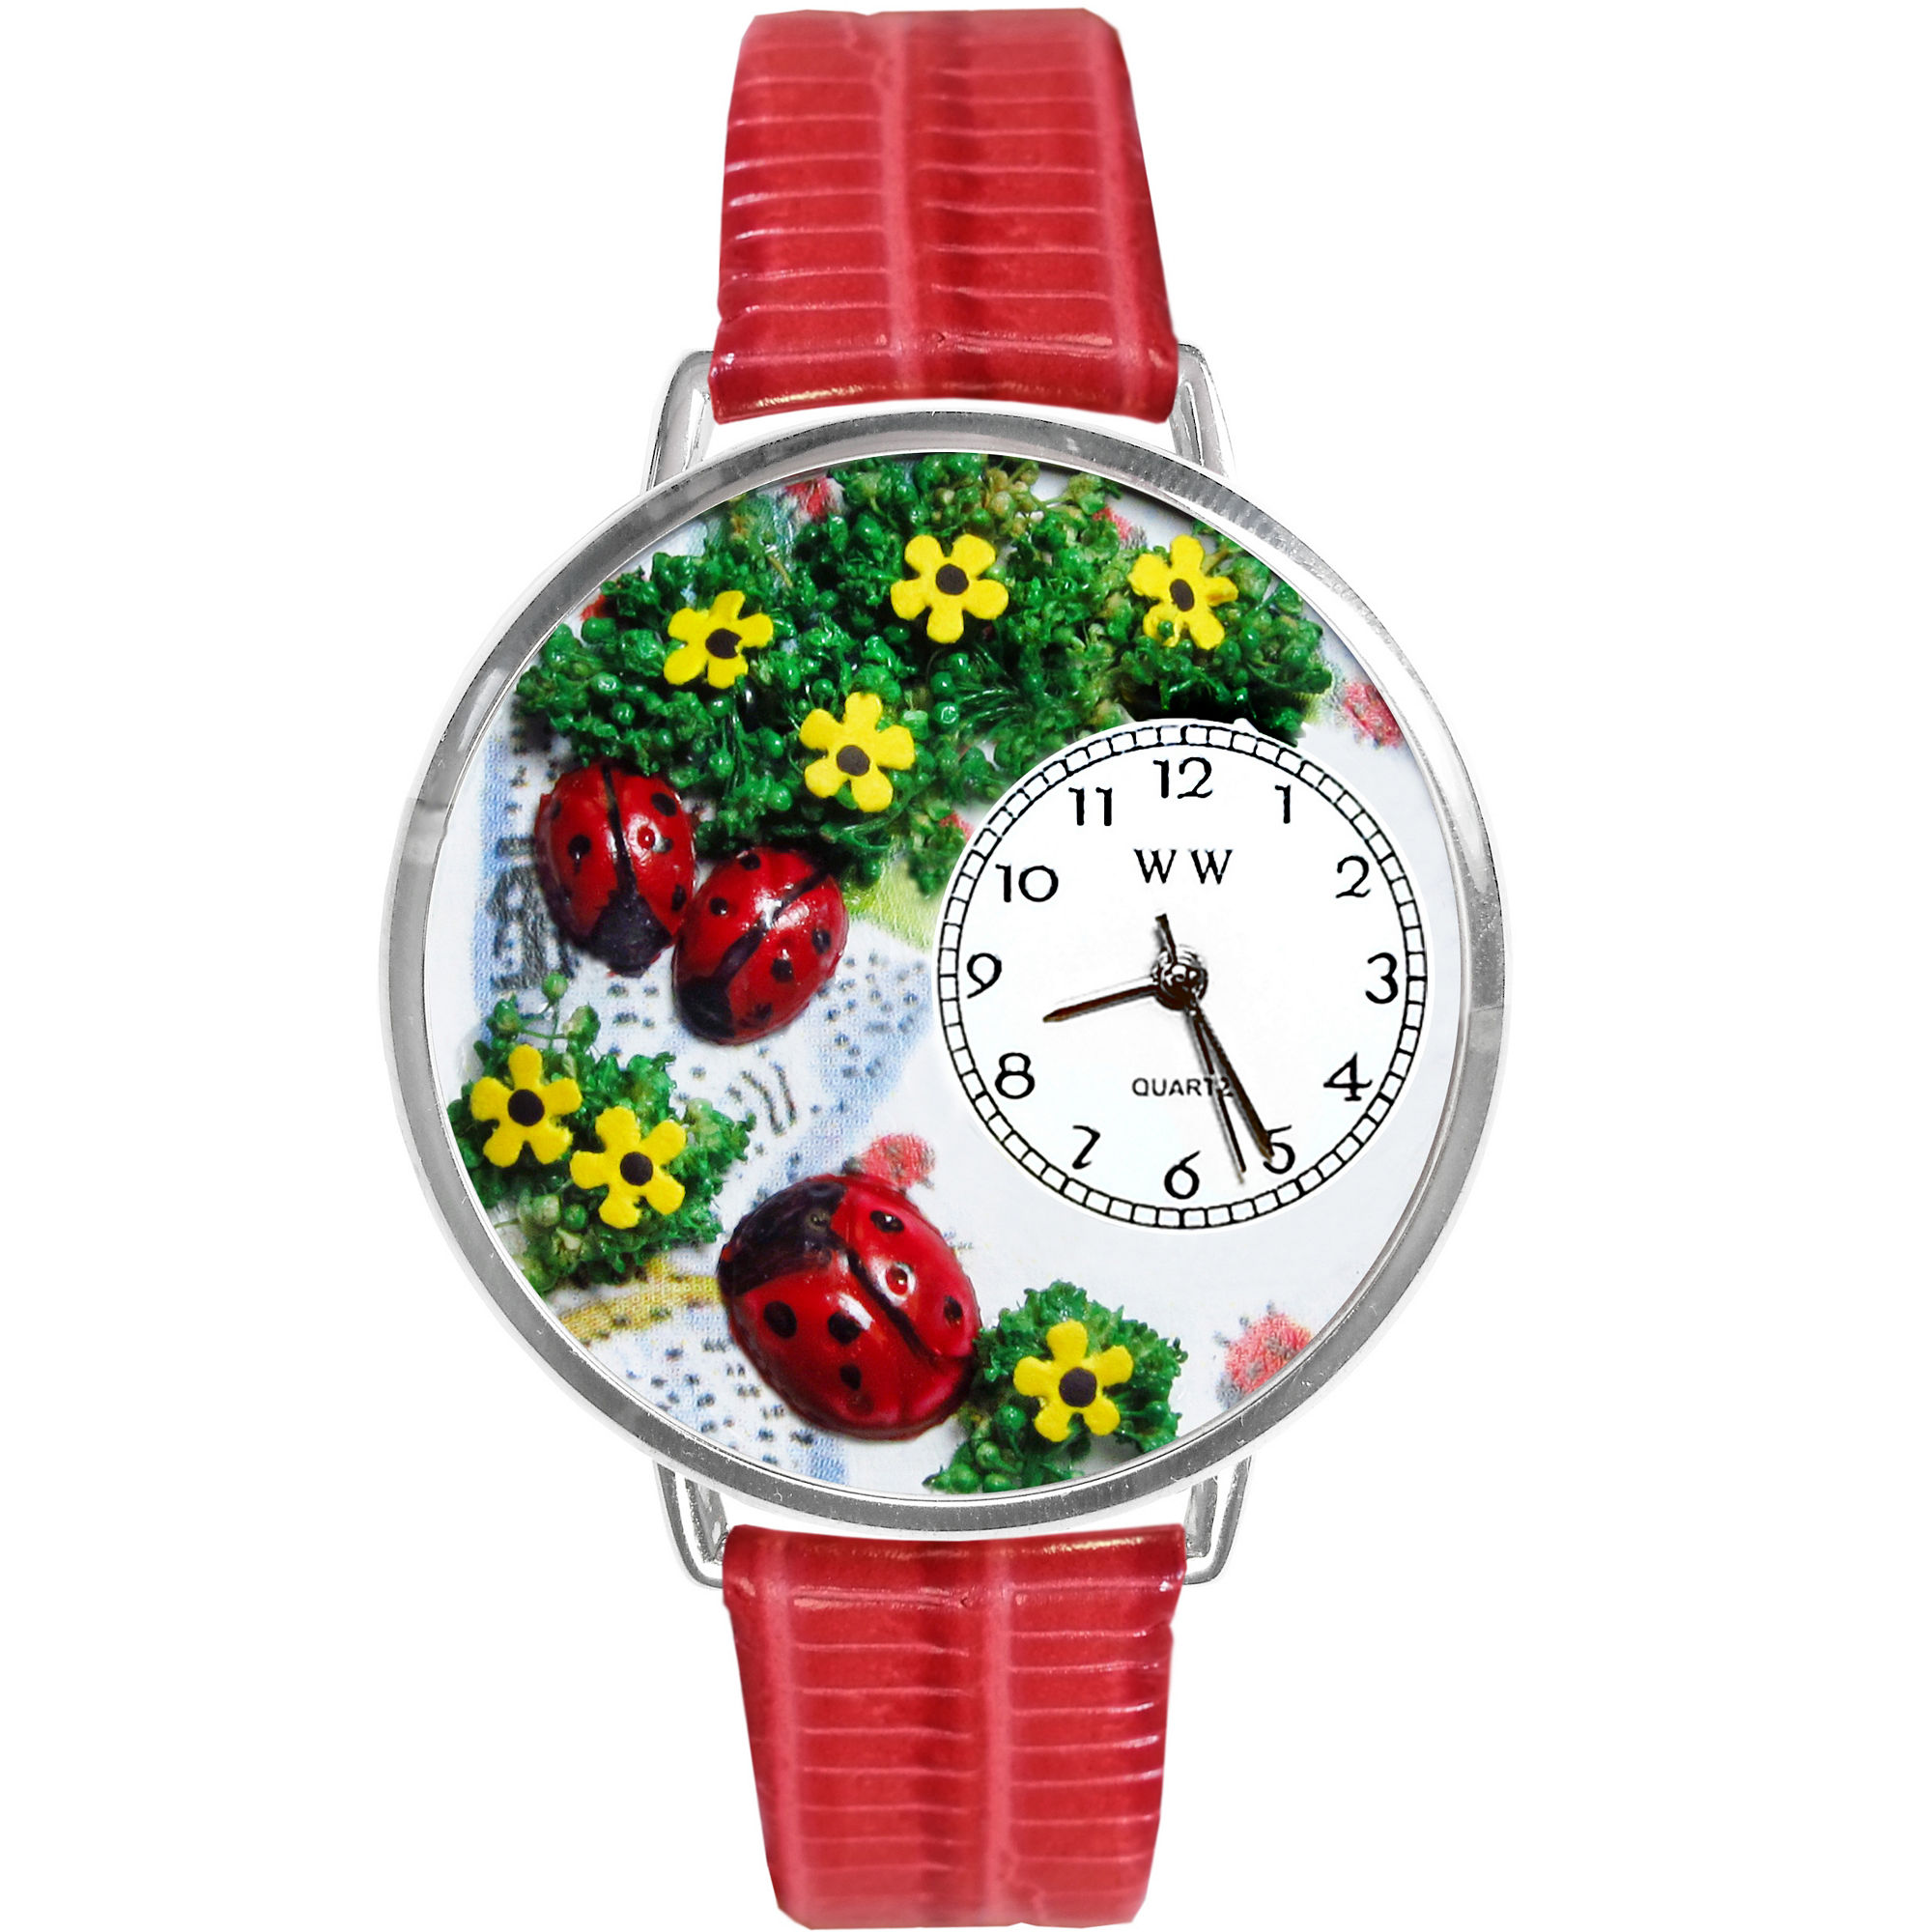 Whimsical Watches Personalized Ladybug Womens Silver-Tone Bezel Red Leather Strap Watch